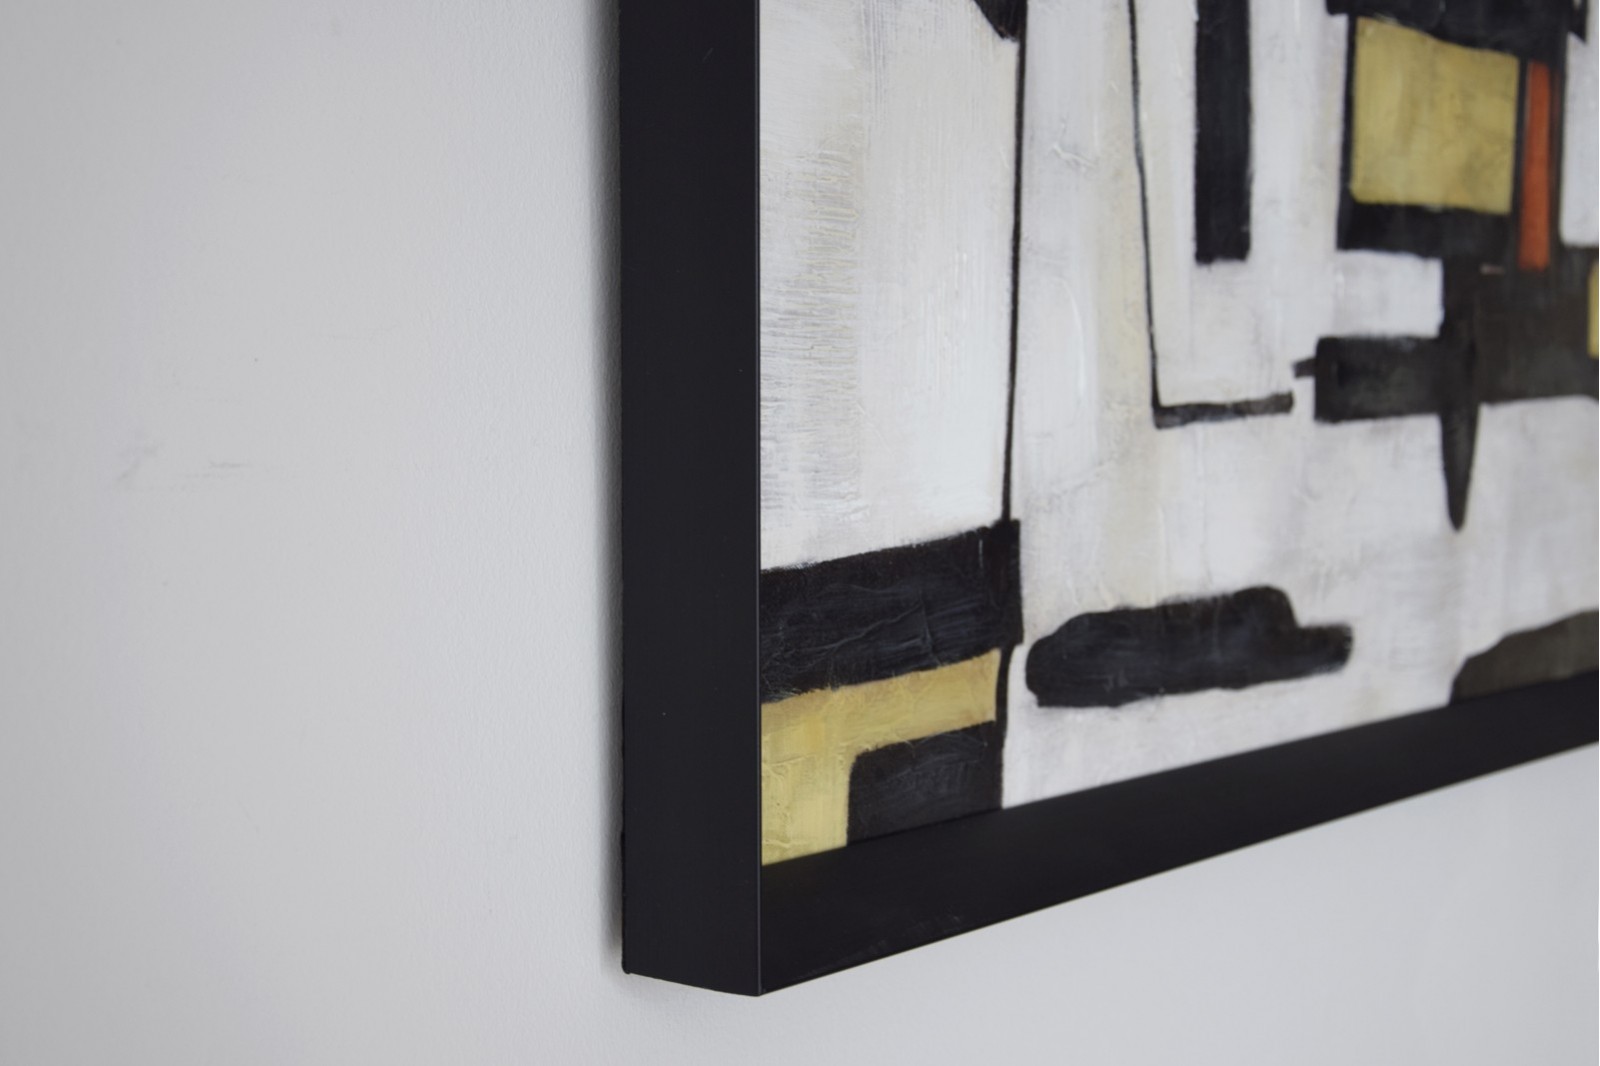 ABSTRACT PAINTING LABYRINTH N2. BLACK FRAME